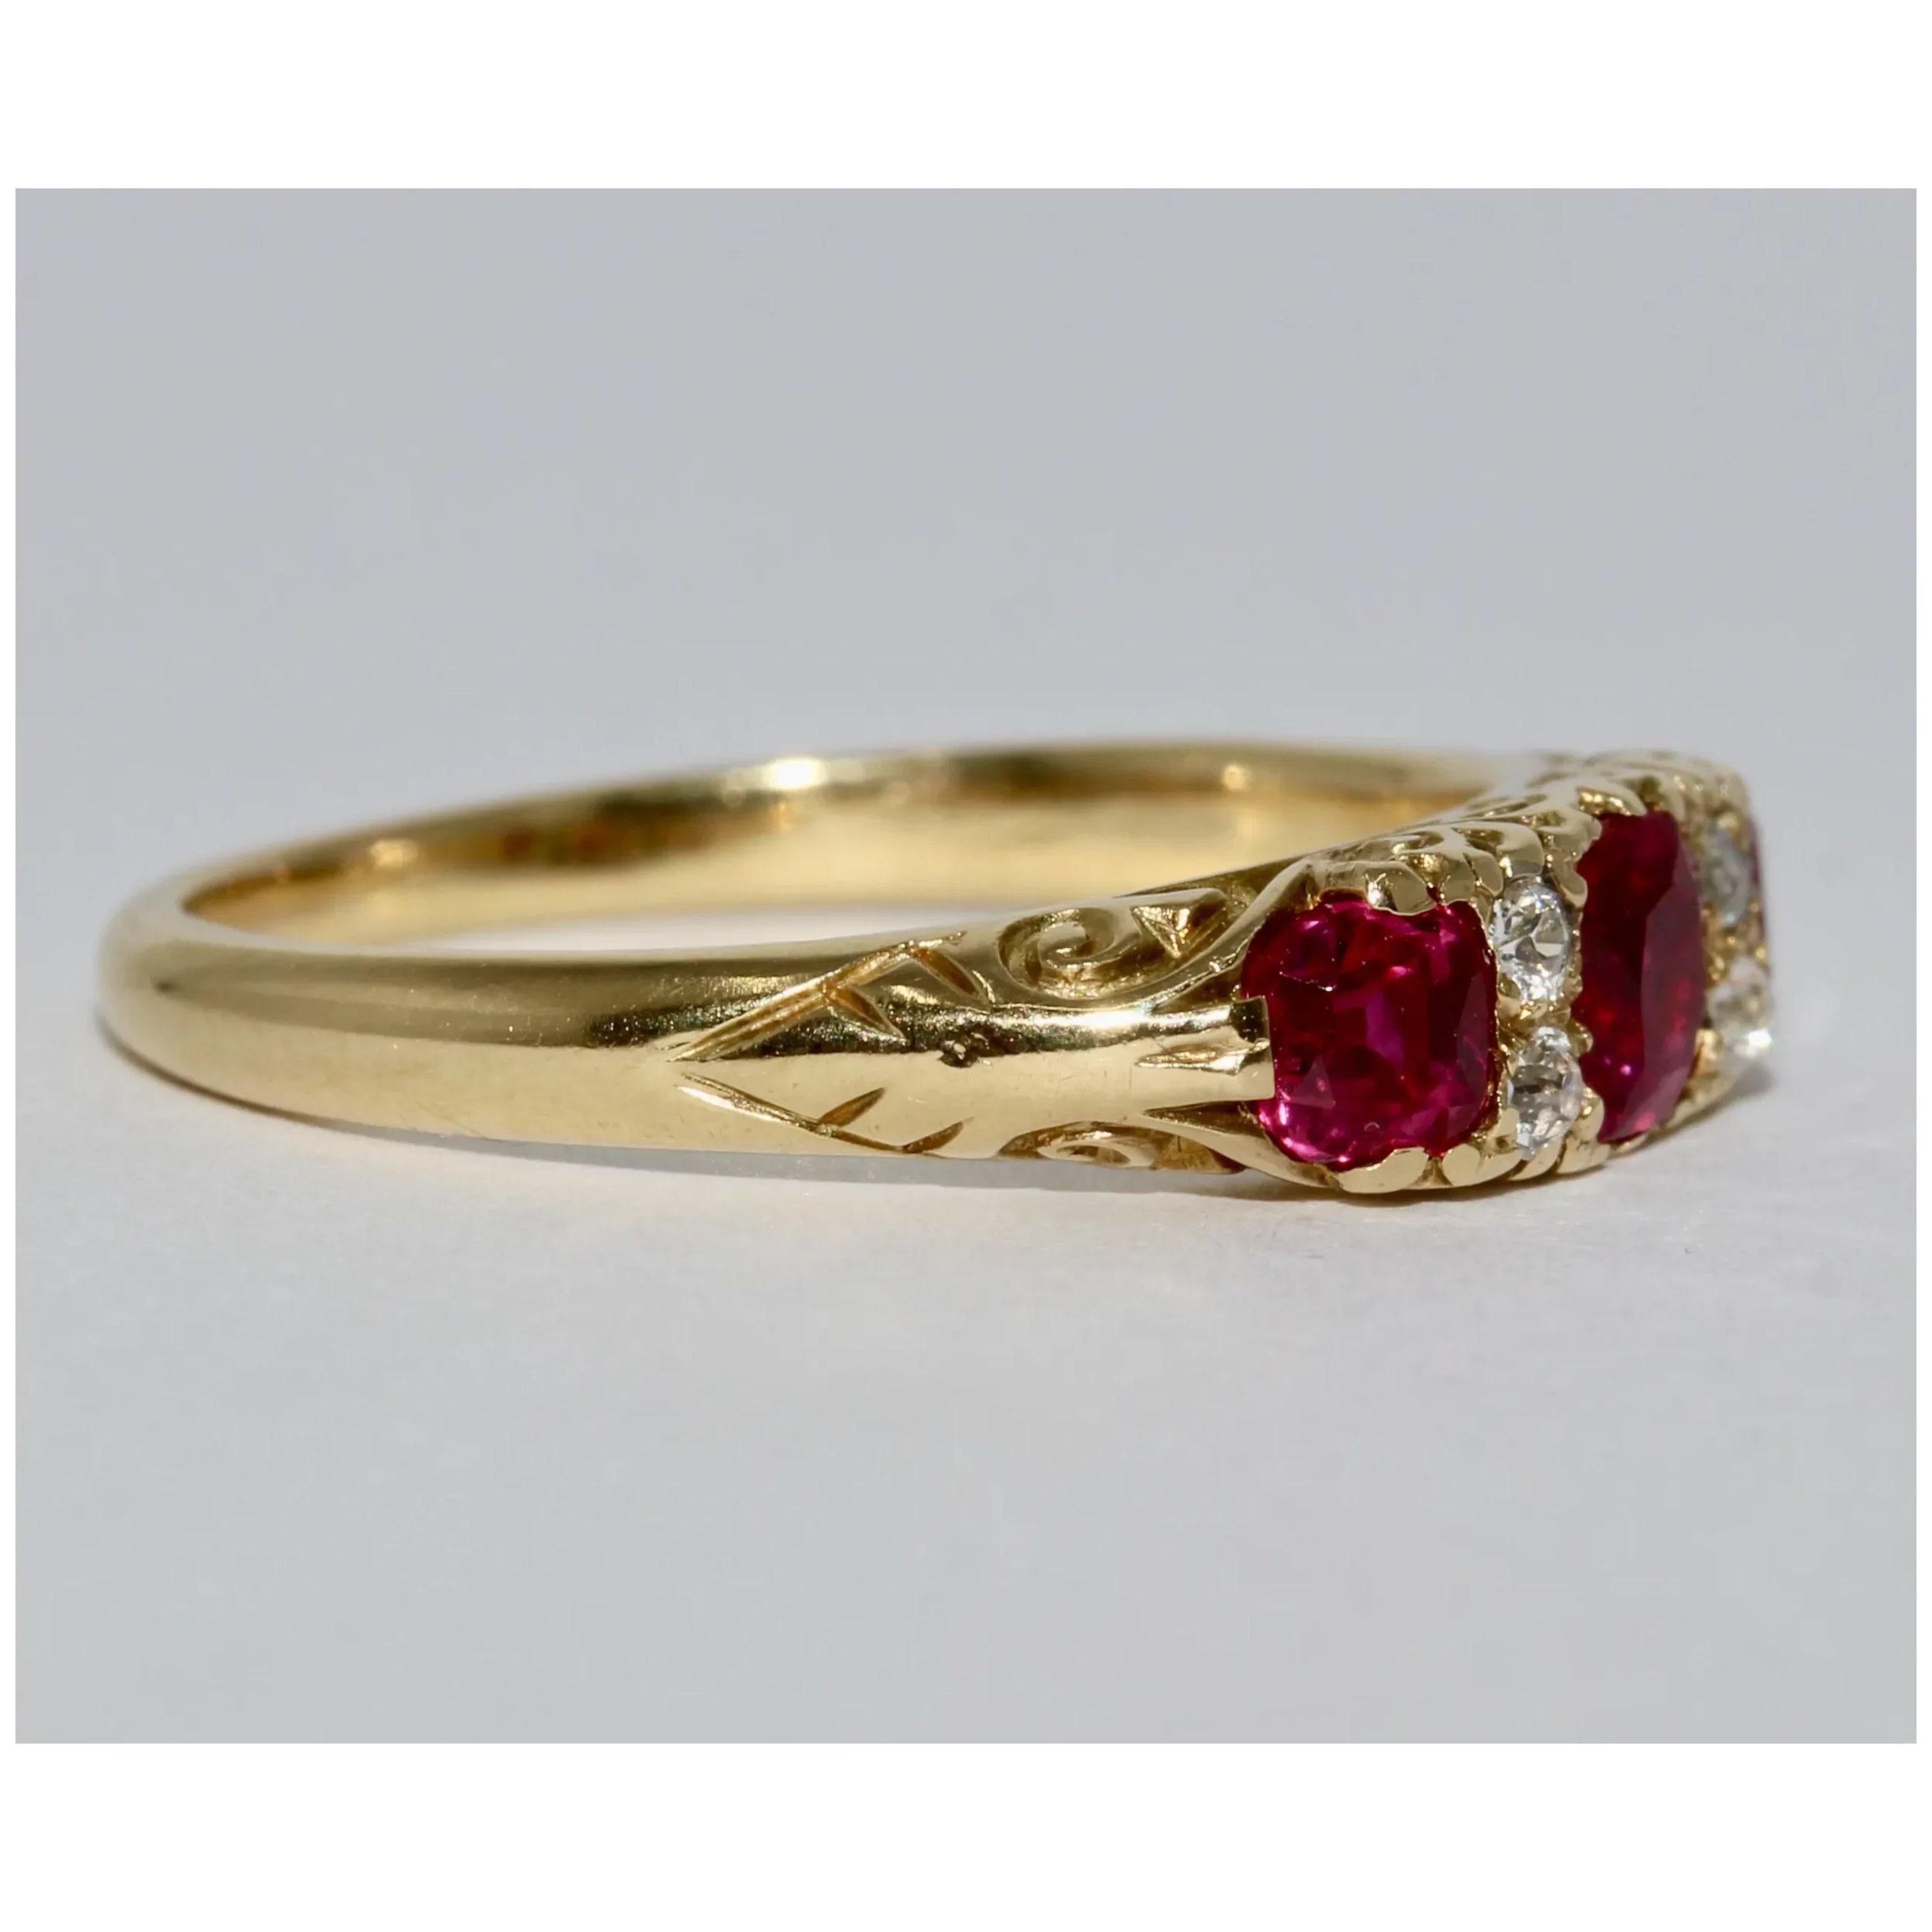 For Sale:  2 Carat Natural Ruby Diamond Engagement Ring Set in 18K Gold, Fashion Ring 2